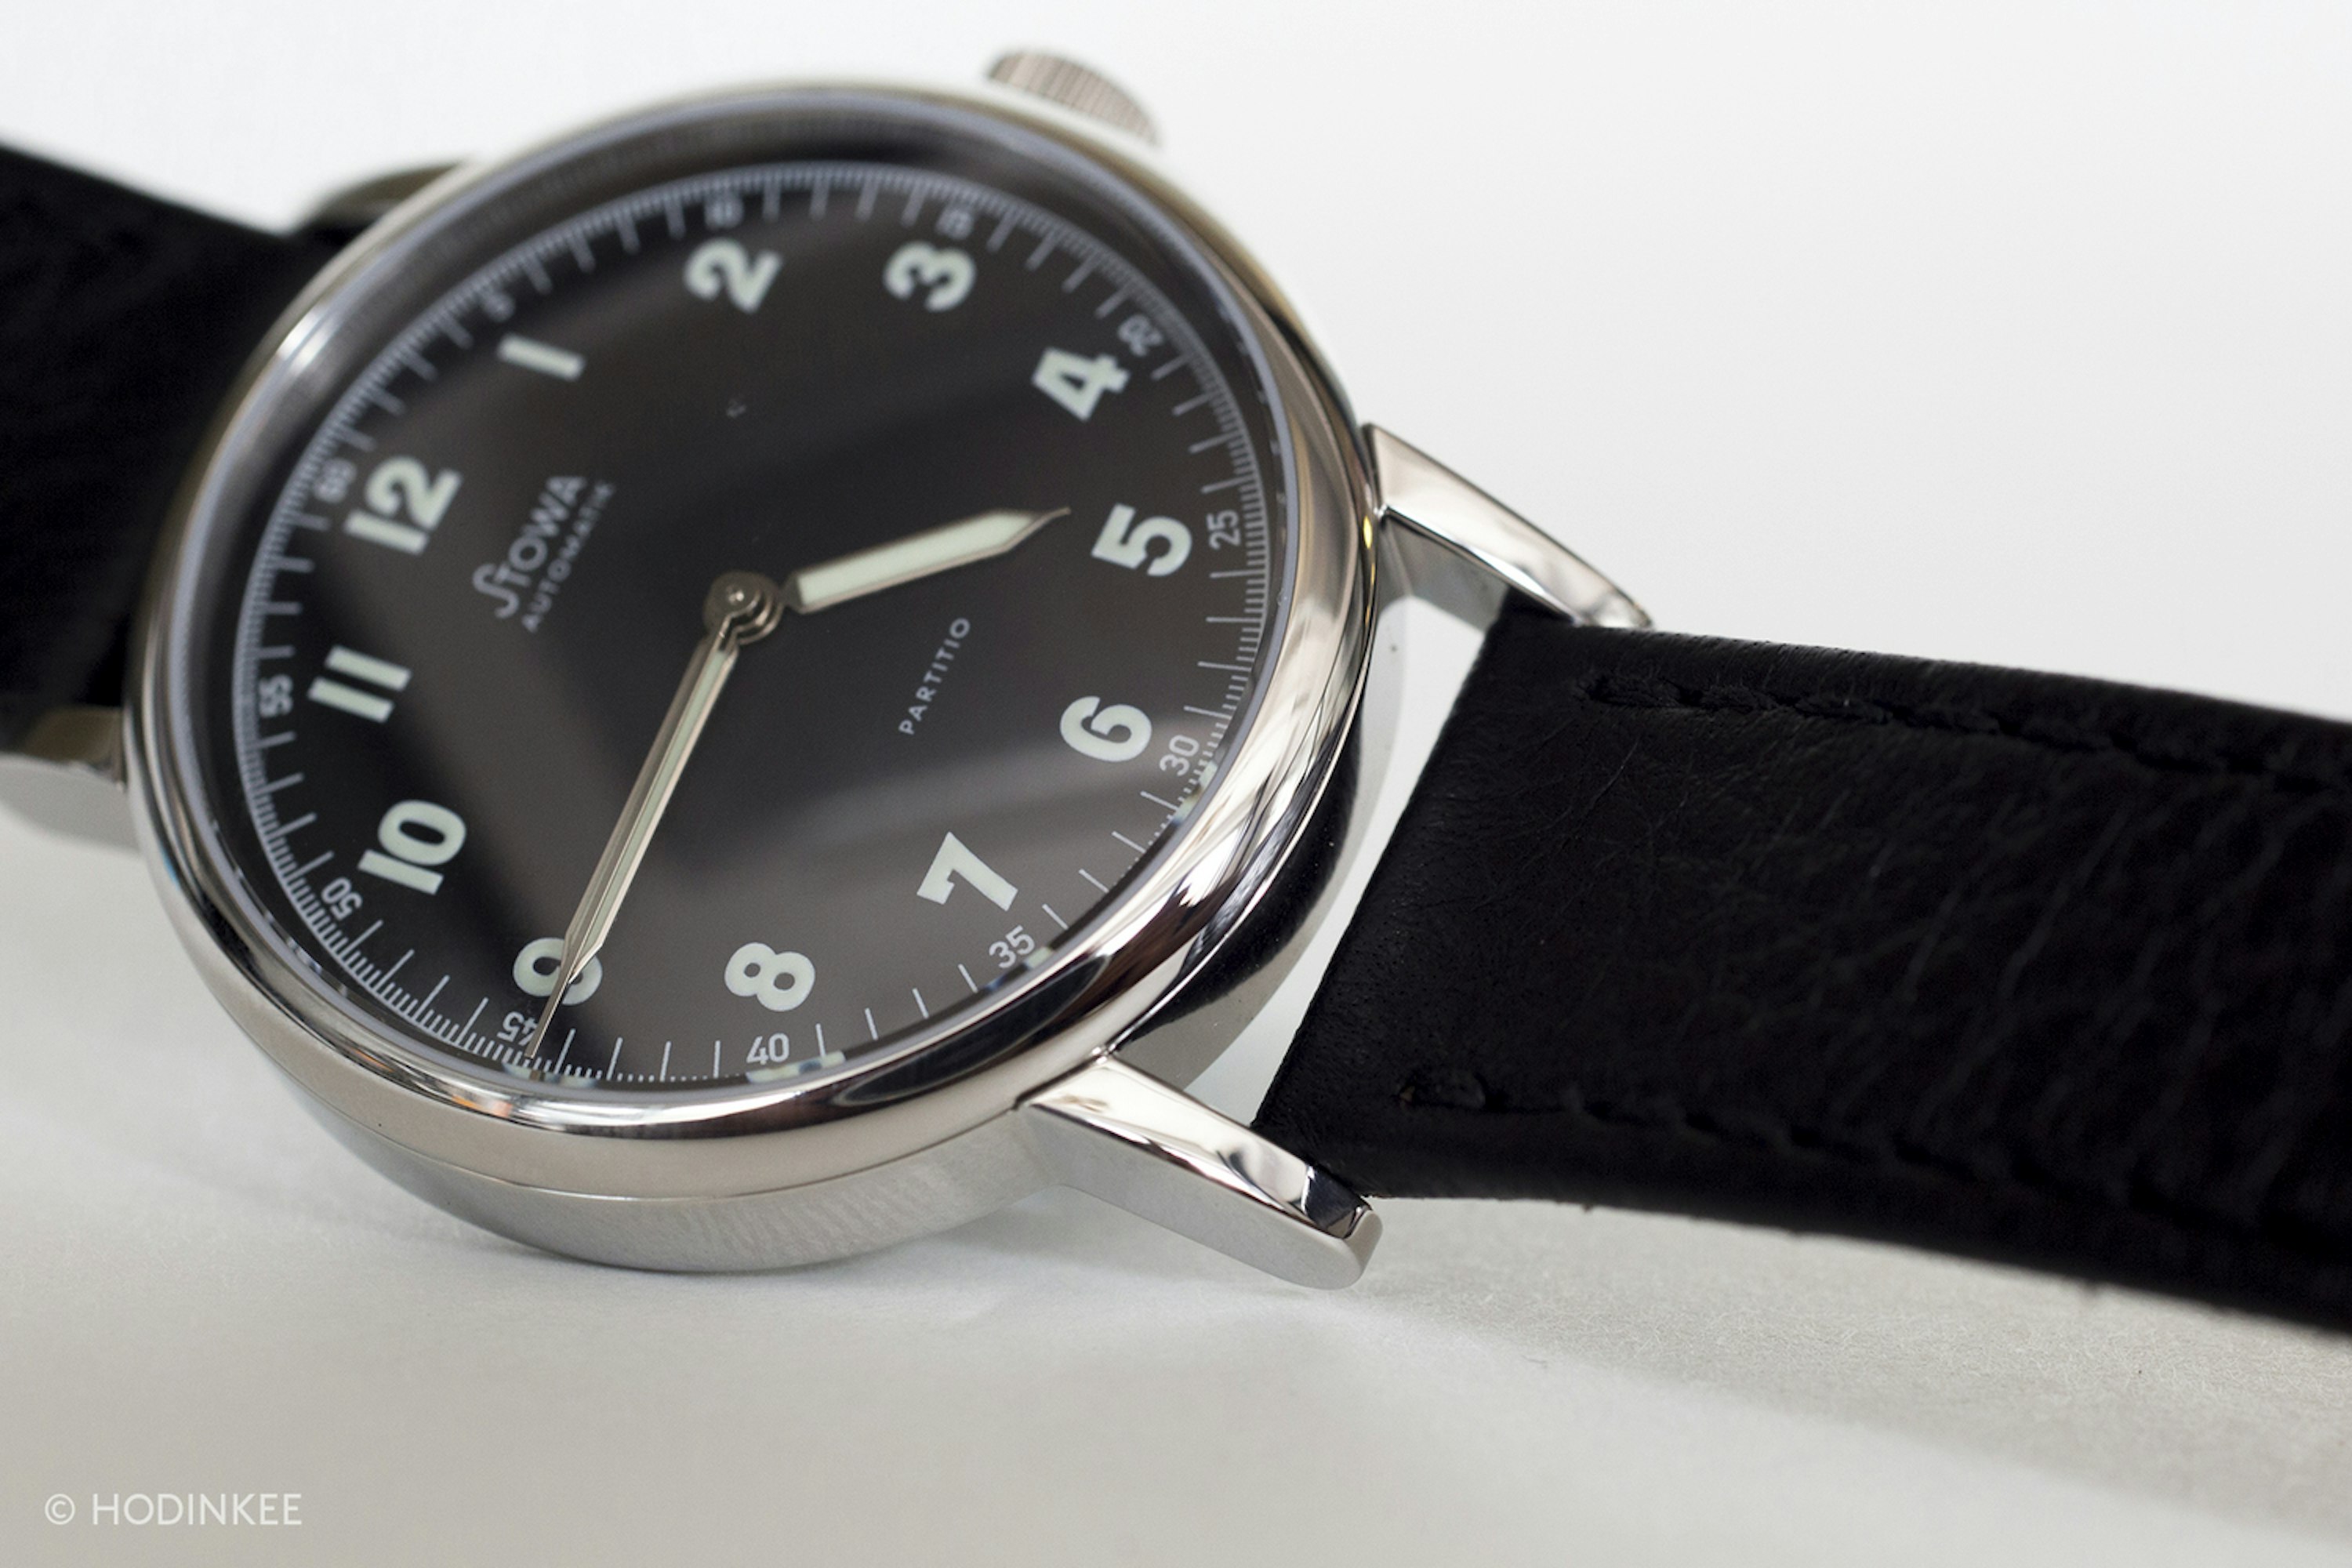 ... Partitio Black Automatic, A 37 mm Vintage-Inspired Watch Under $1,000